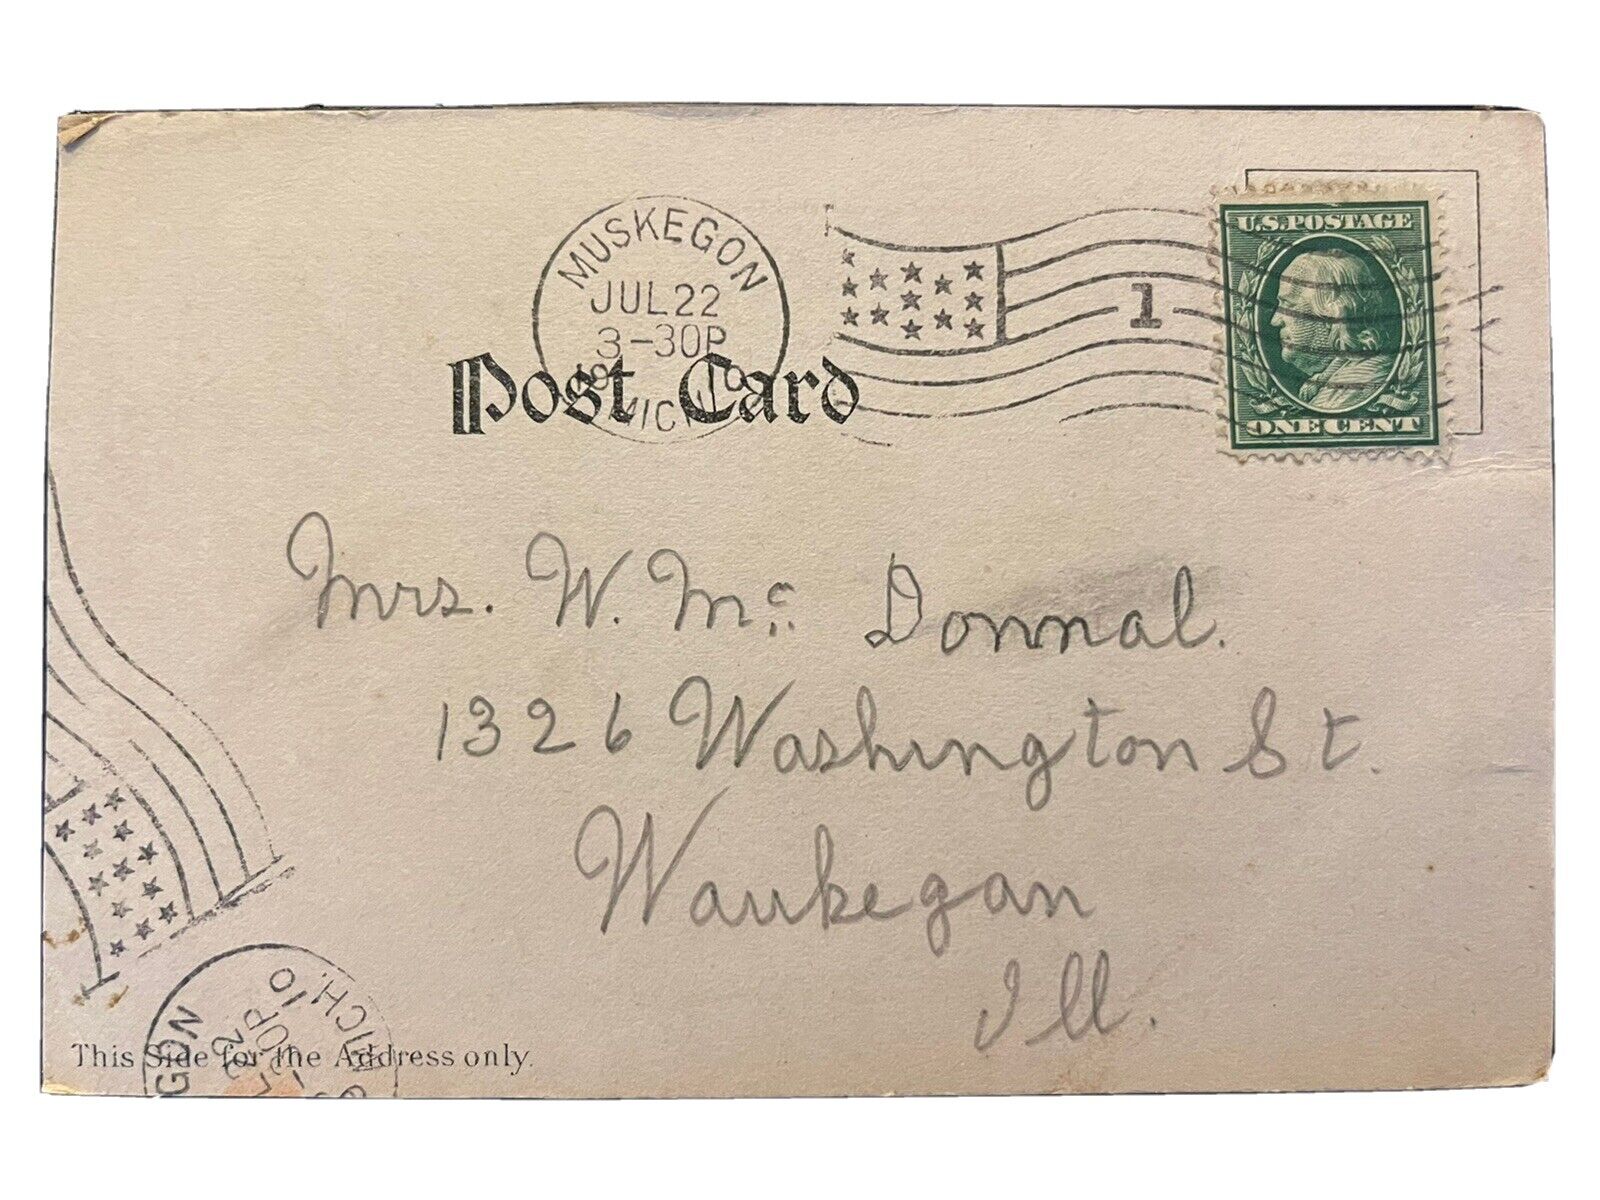 1910 Postcard With One Cent Green Benjamin Franklin Postage Stamp